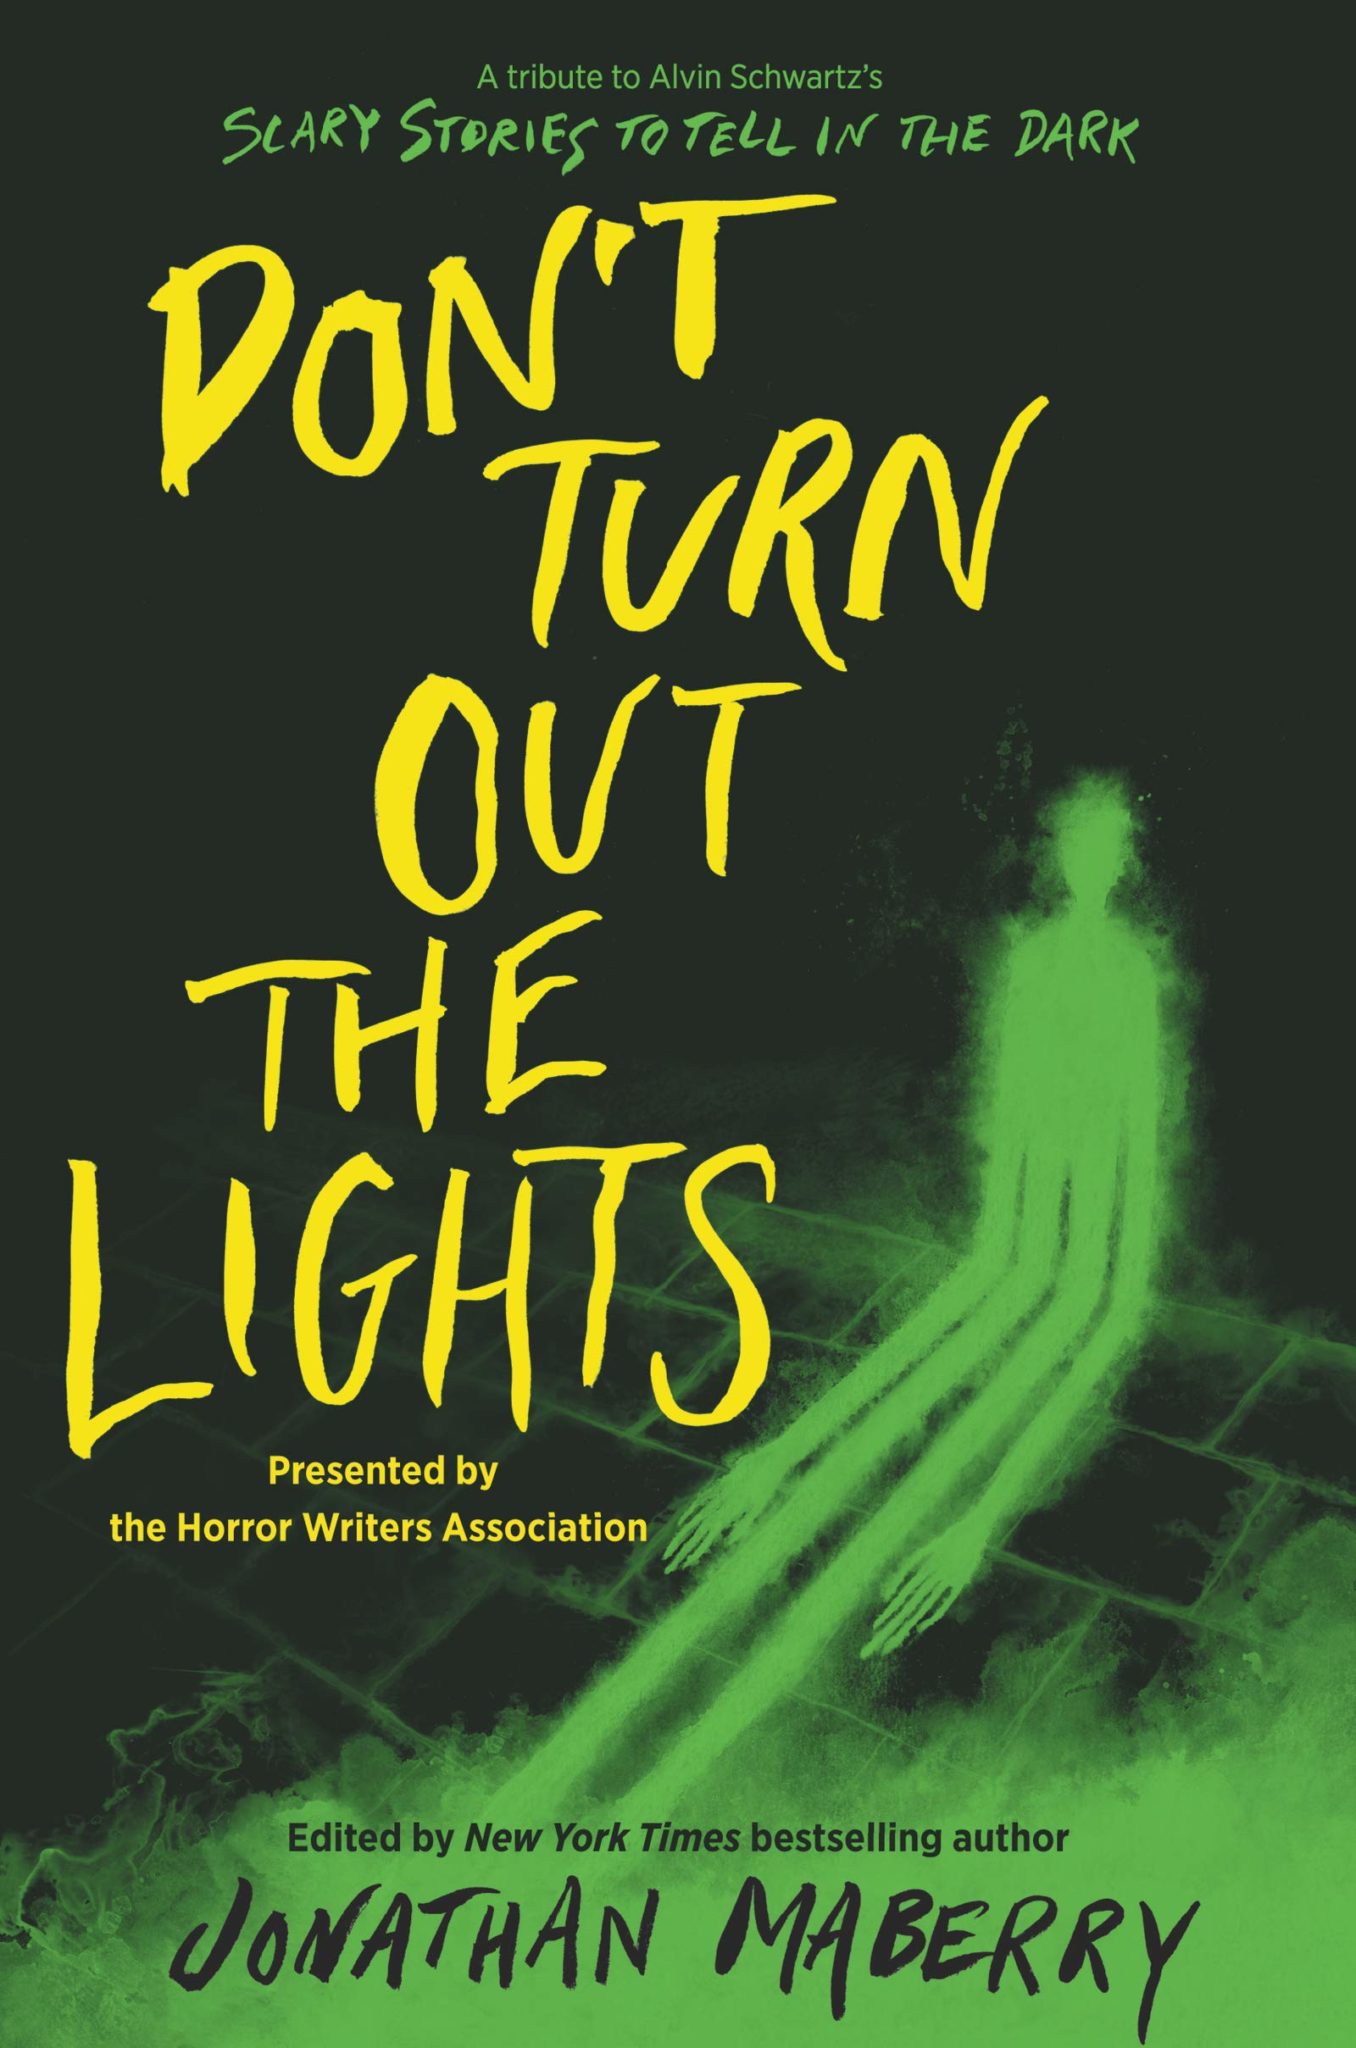 "Don't Turn Out the Lights" book cover by Jonathan Maberry